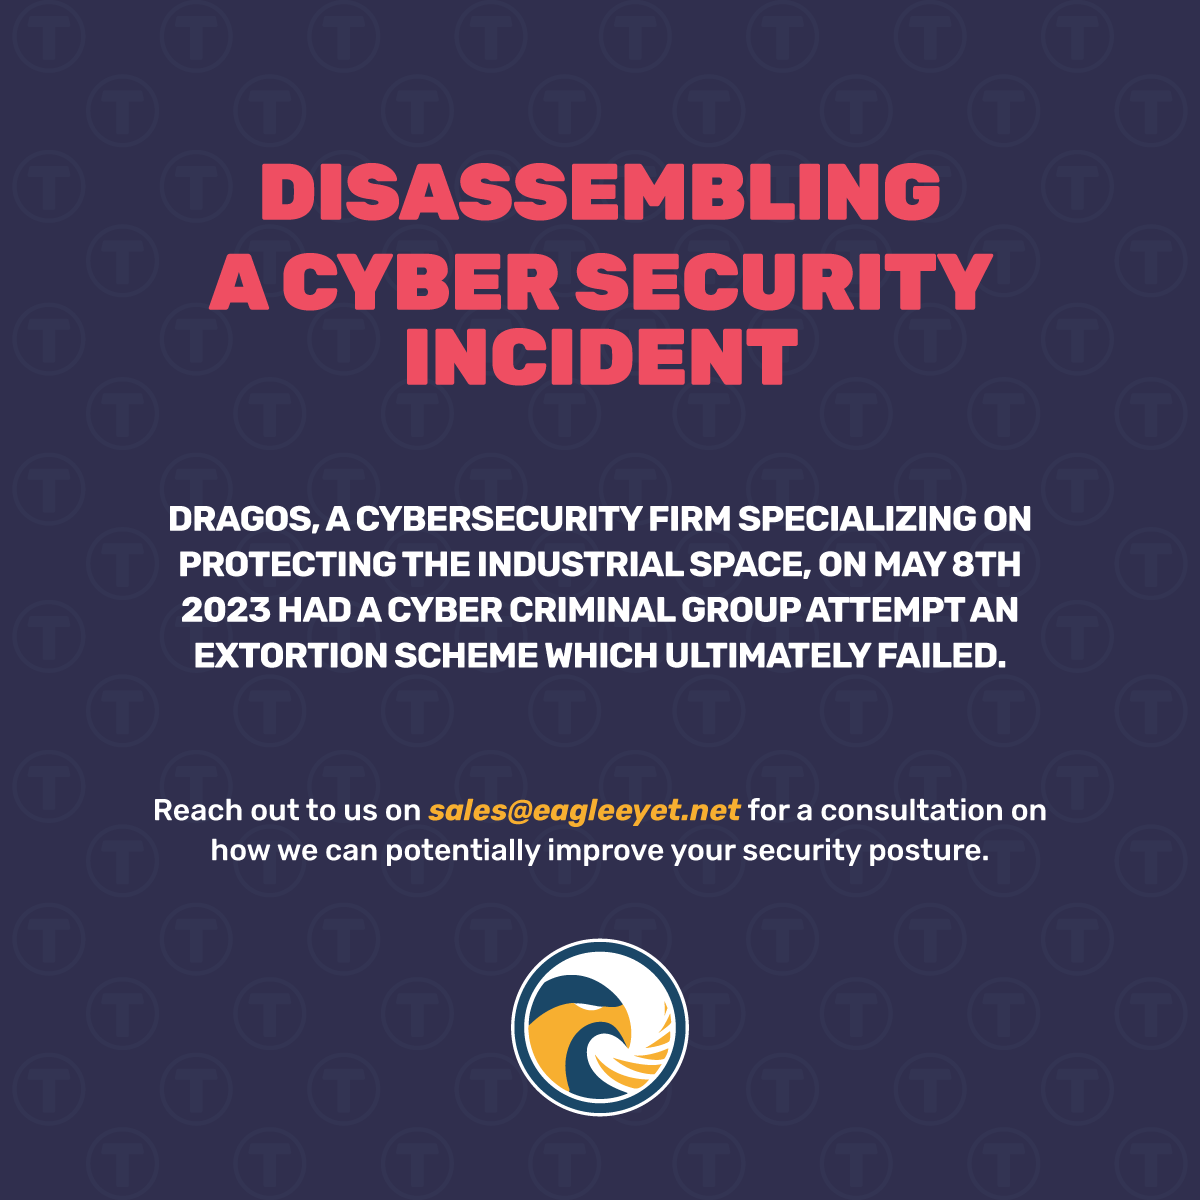 Disassembling A Cyber Security Incident